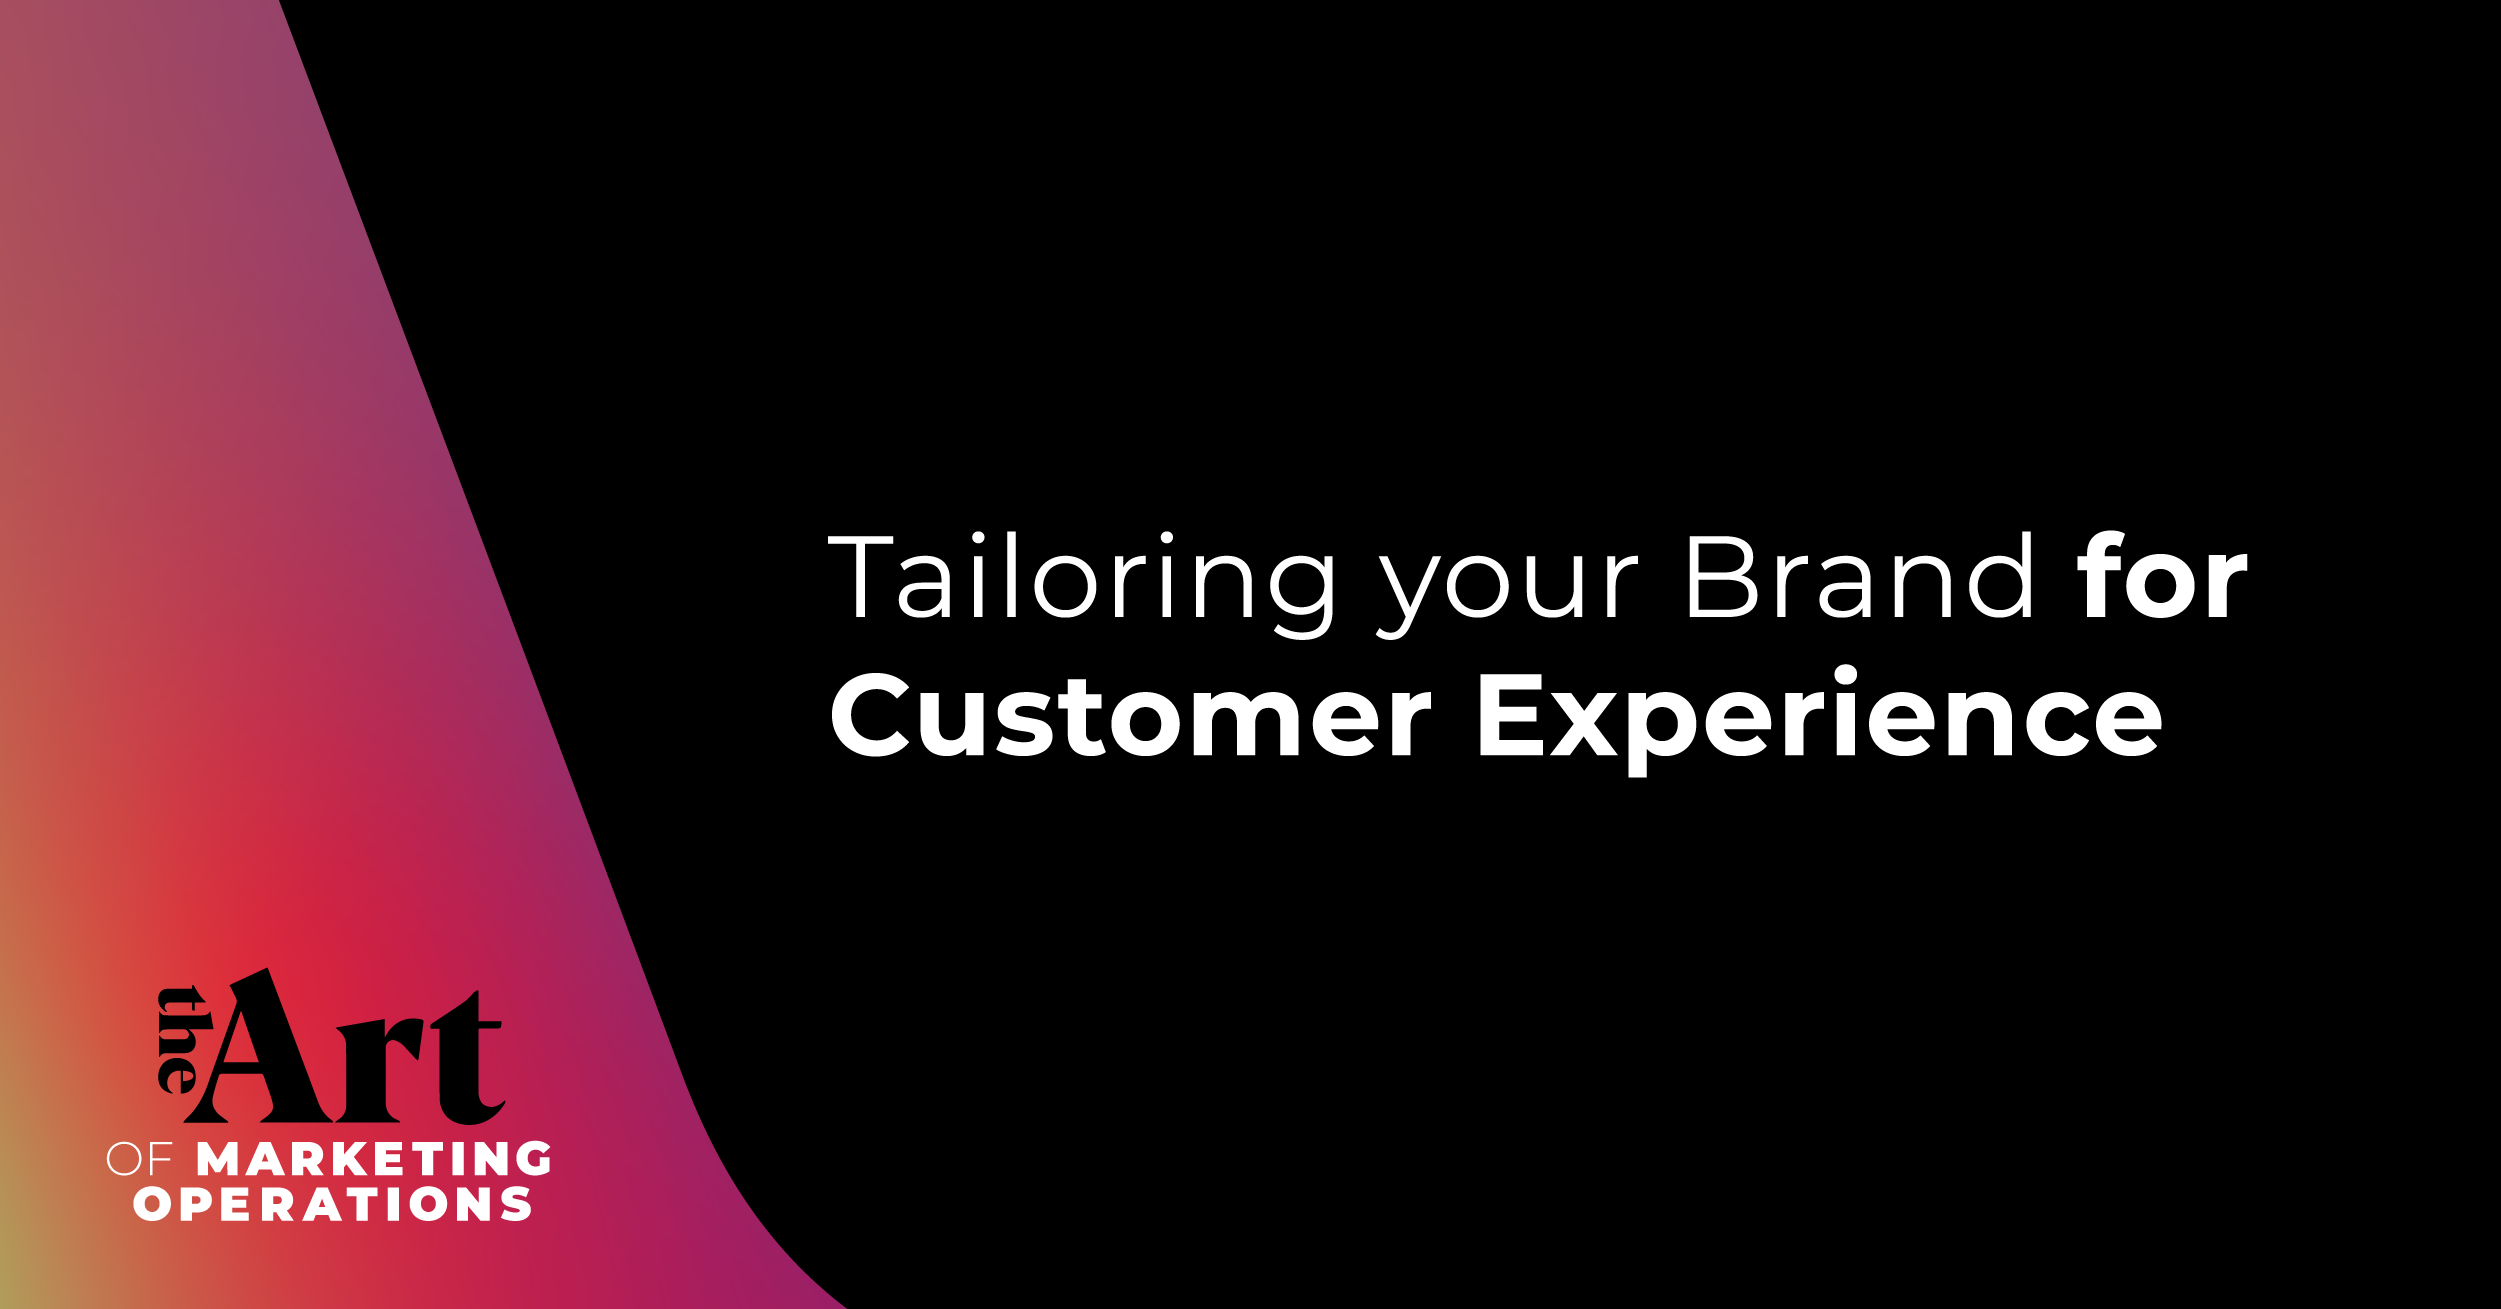 Tailoring your Brand for Customer Experience